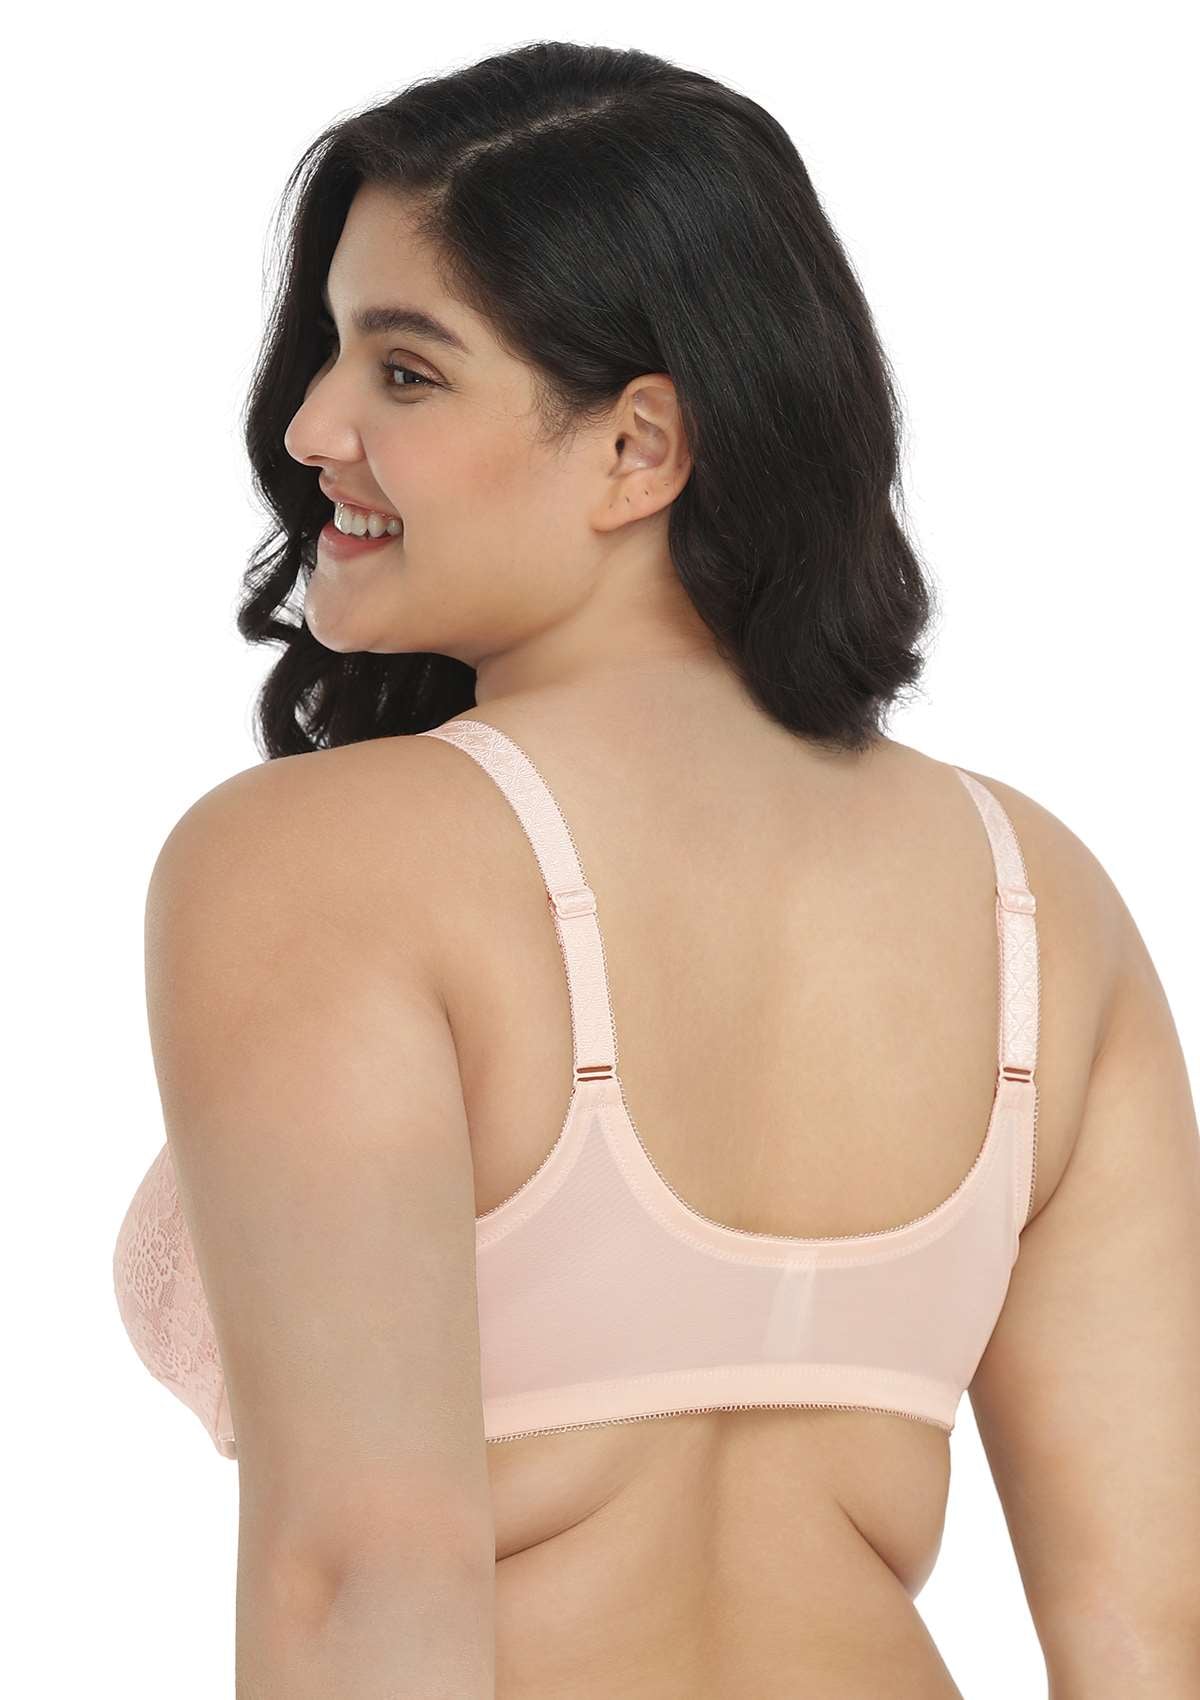 HSIA Nymphaea Easy-to-wear Front-Close Lace Unlined Underwire Bra - Dusty Peach / 34 / D